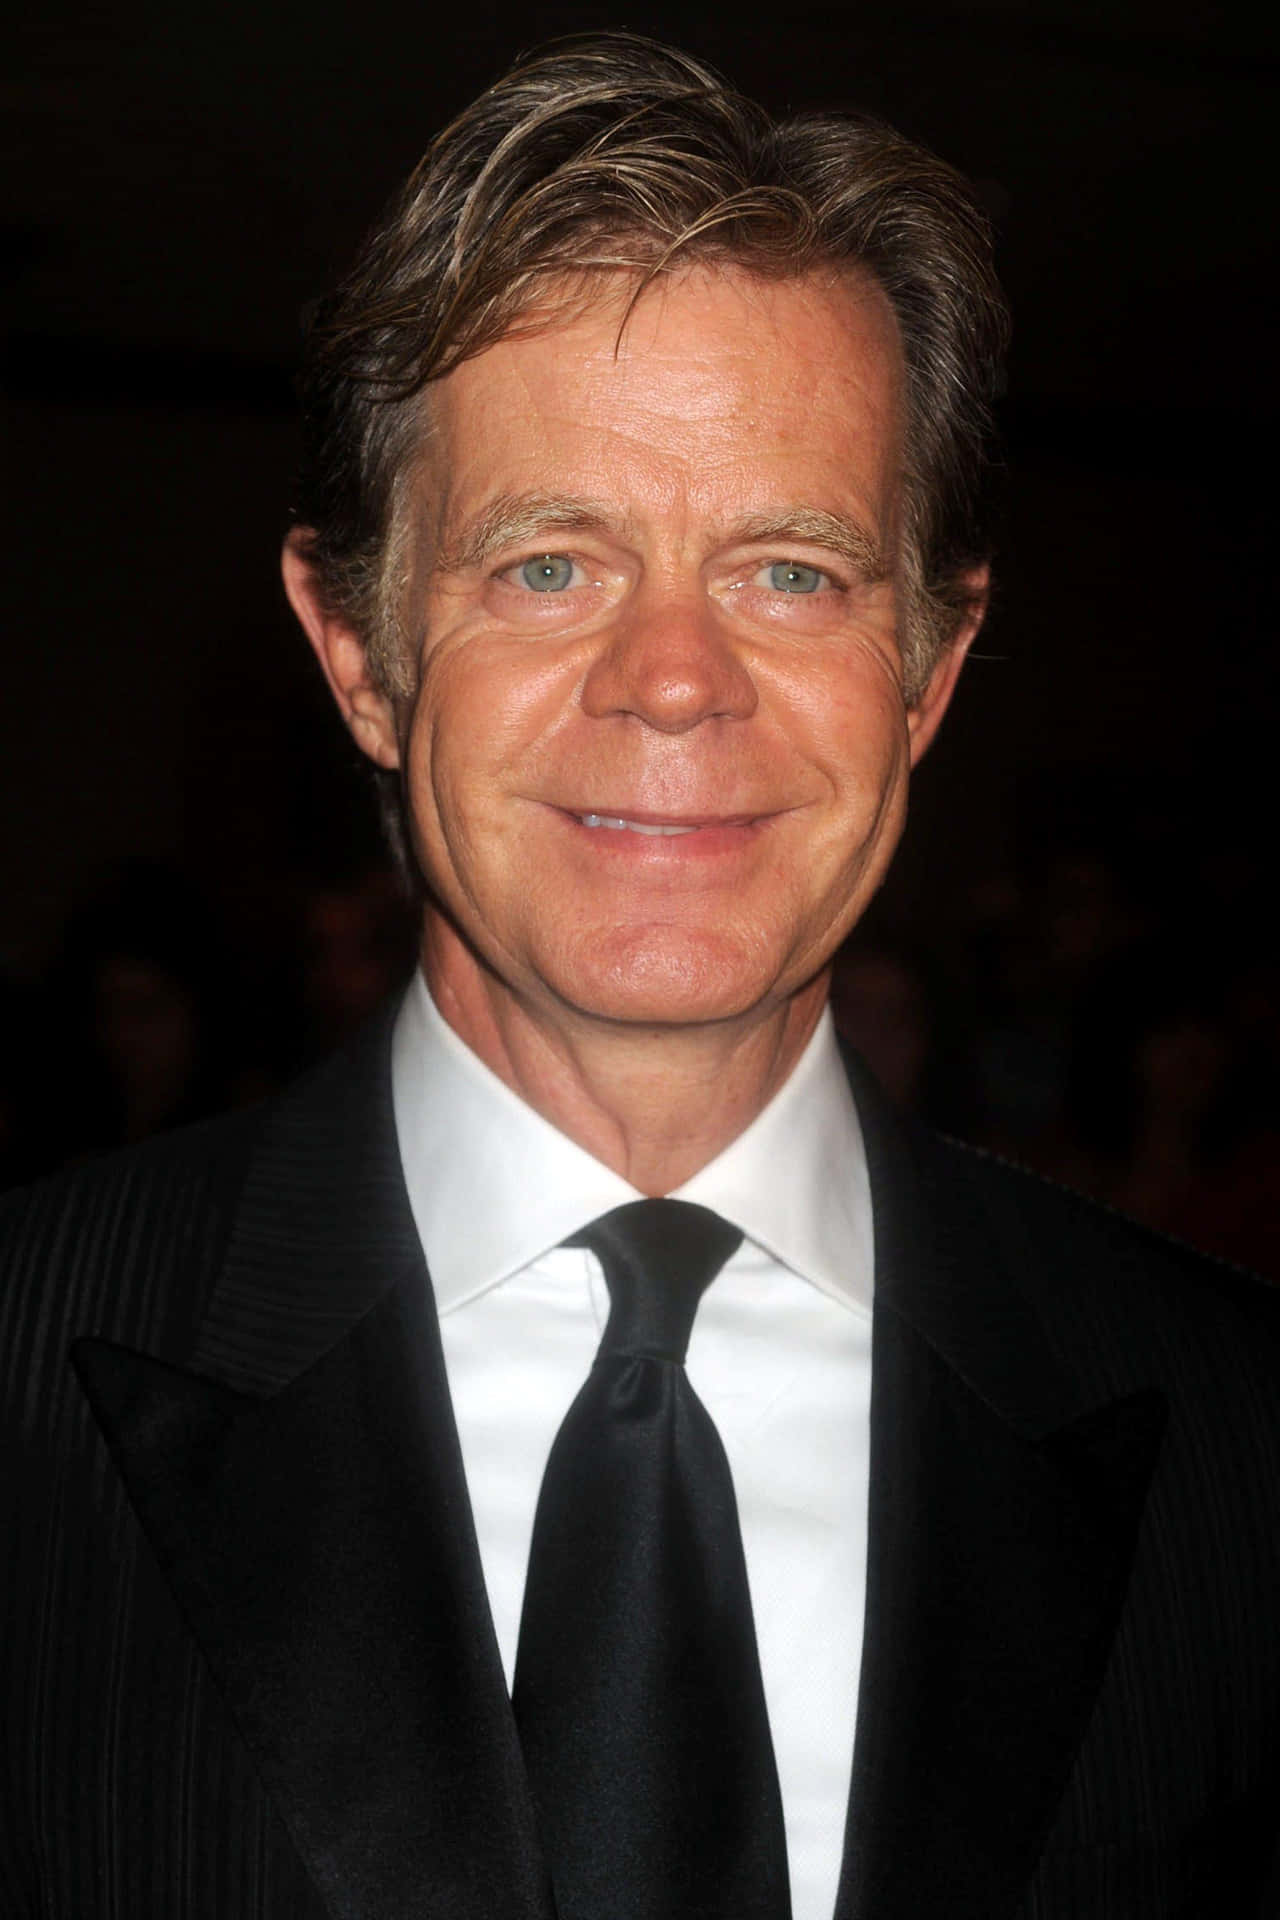 William H. Macy Posing At A Red Carpet Event